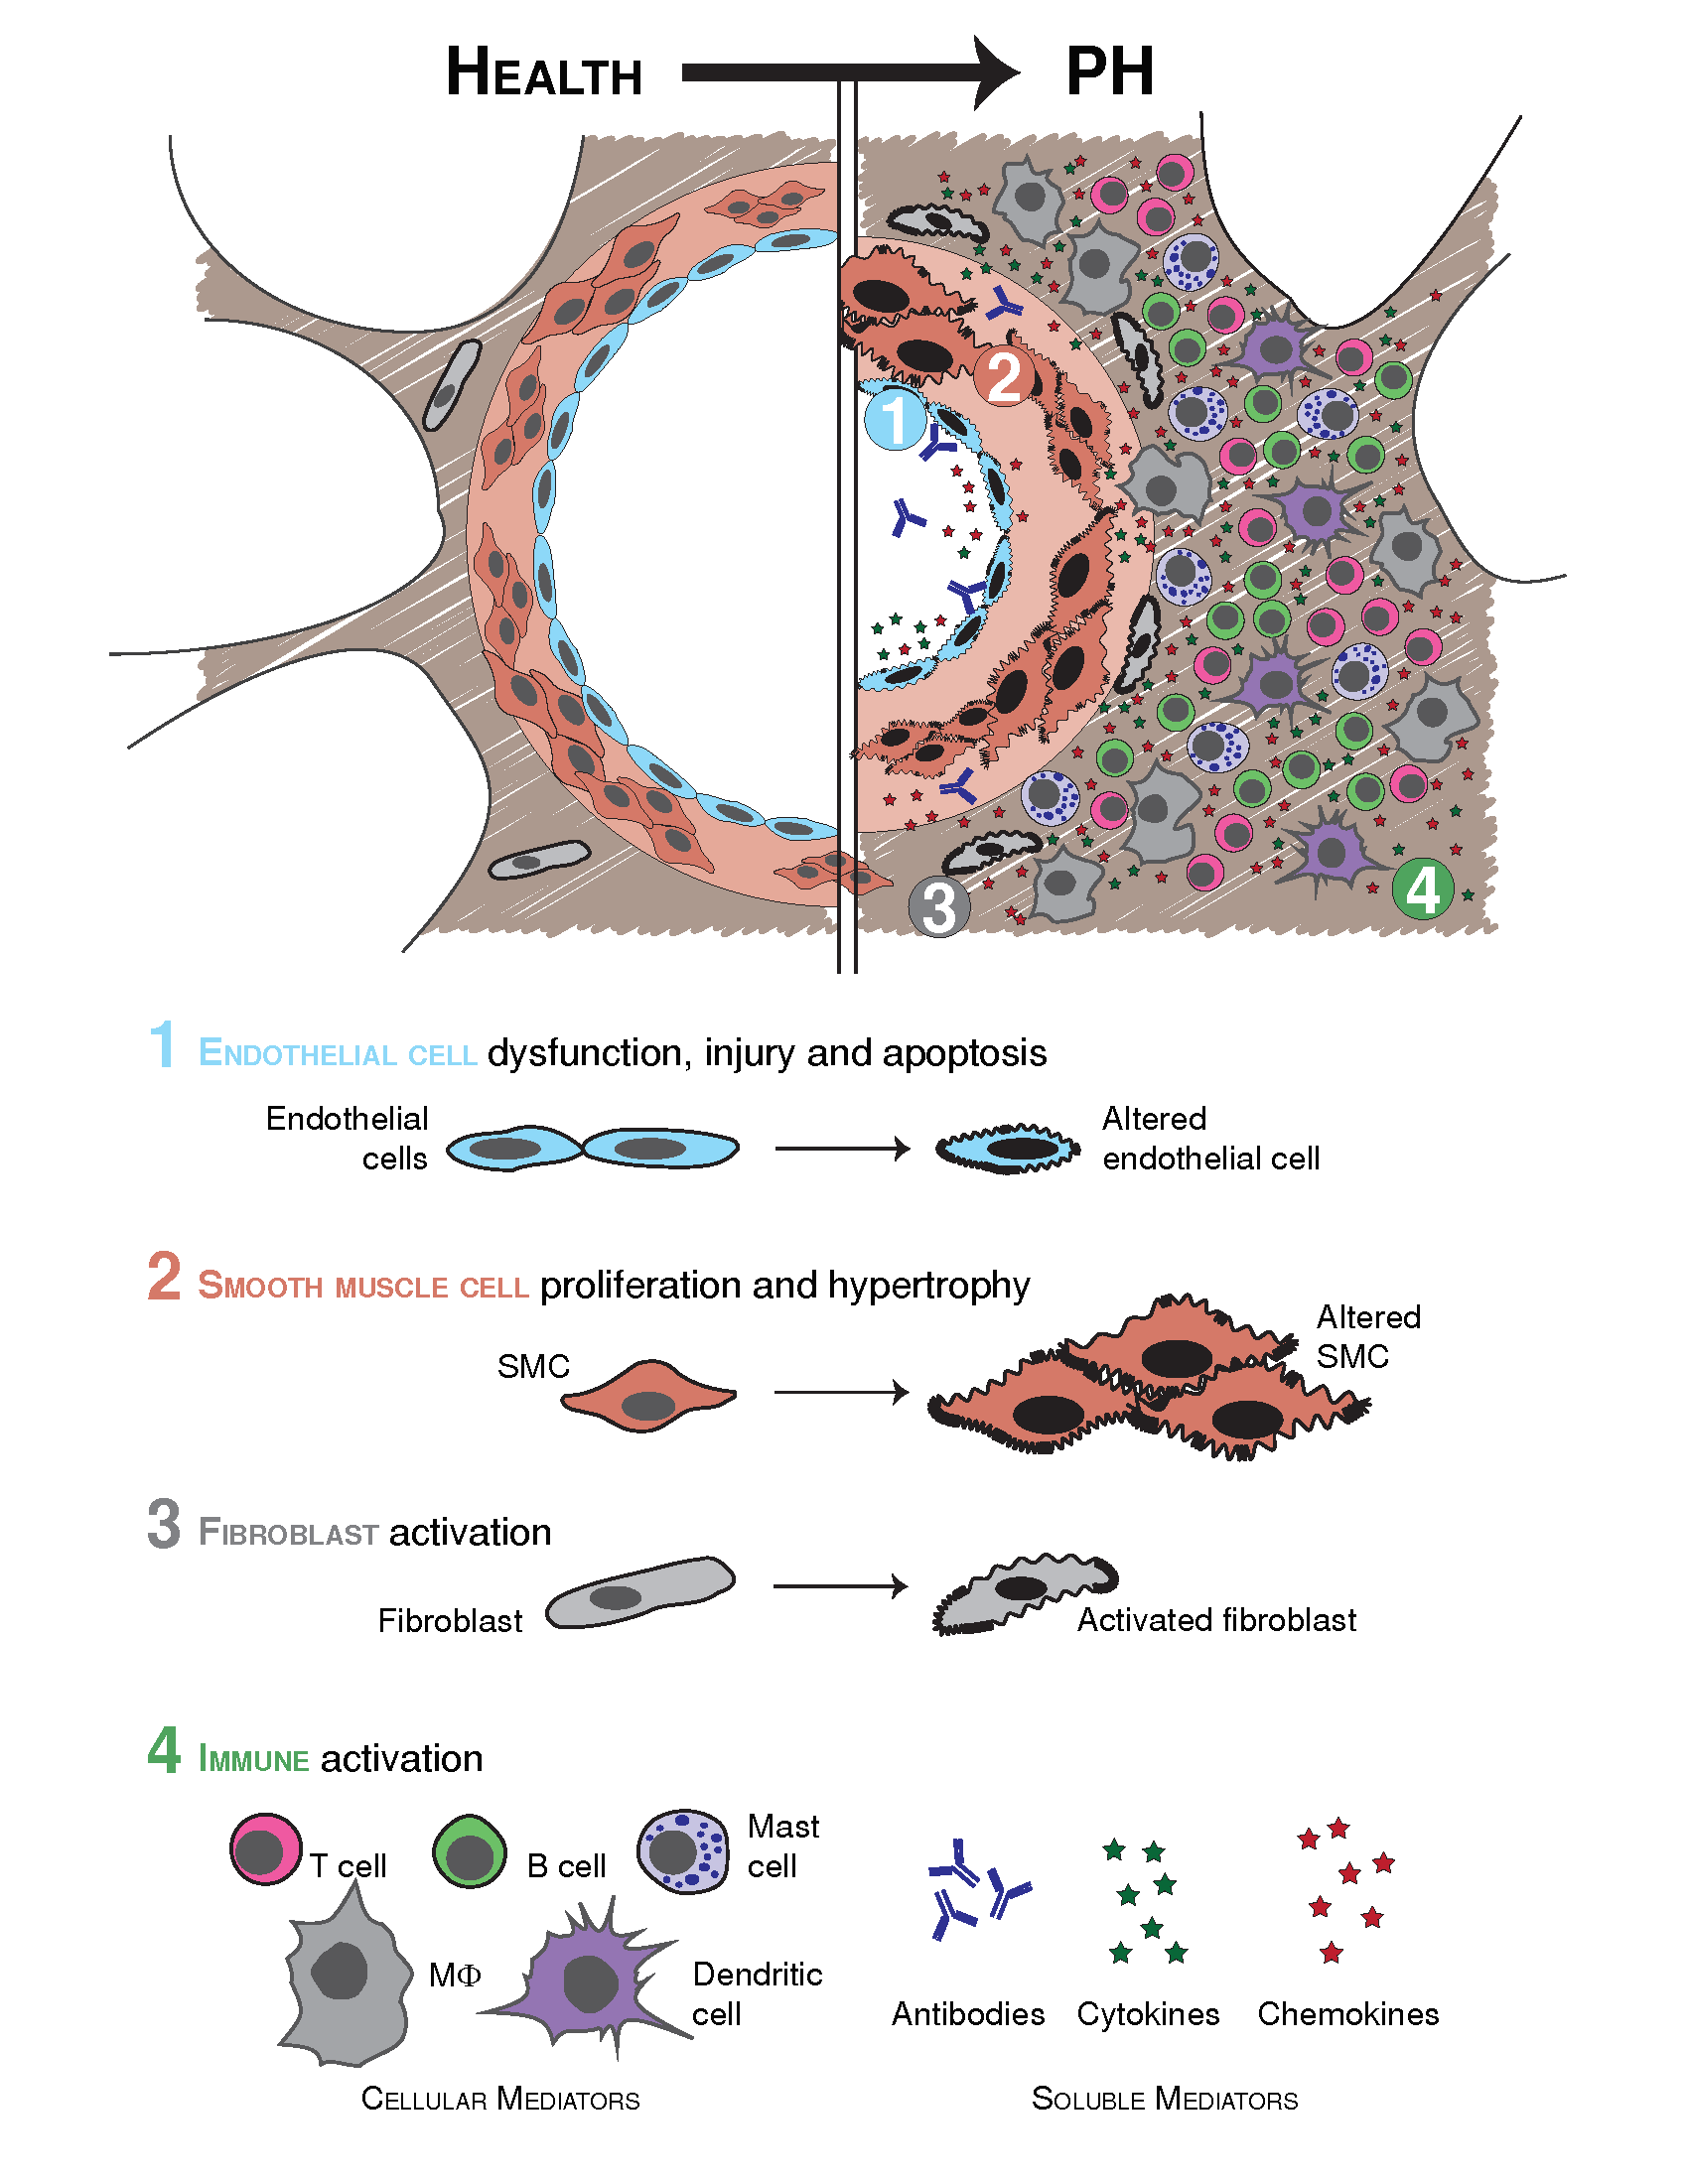 A scientific diagram illustrating that PAH is characterized by inflammation of the lung vasculature, involving virtually all subtypes of cells of the vascular wall, as well as mature immune lineages. Endothelial cells and smooth muscle cells proliferate, fibroblasts are activated, and immune cells invade the vessel wall.